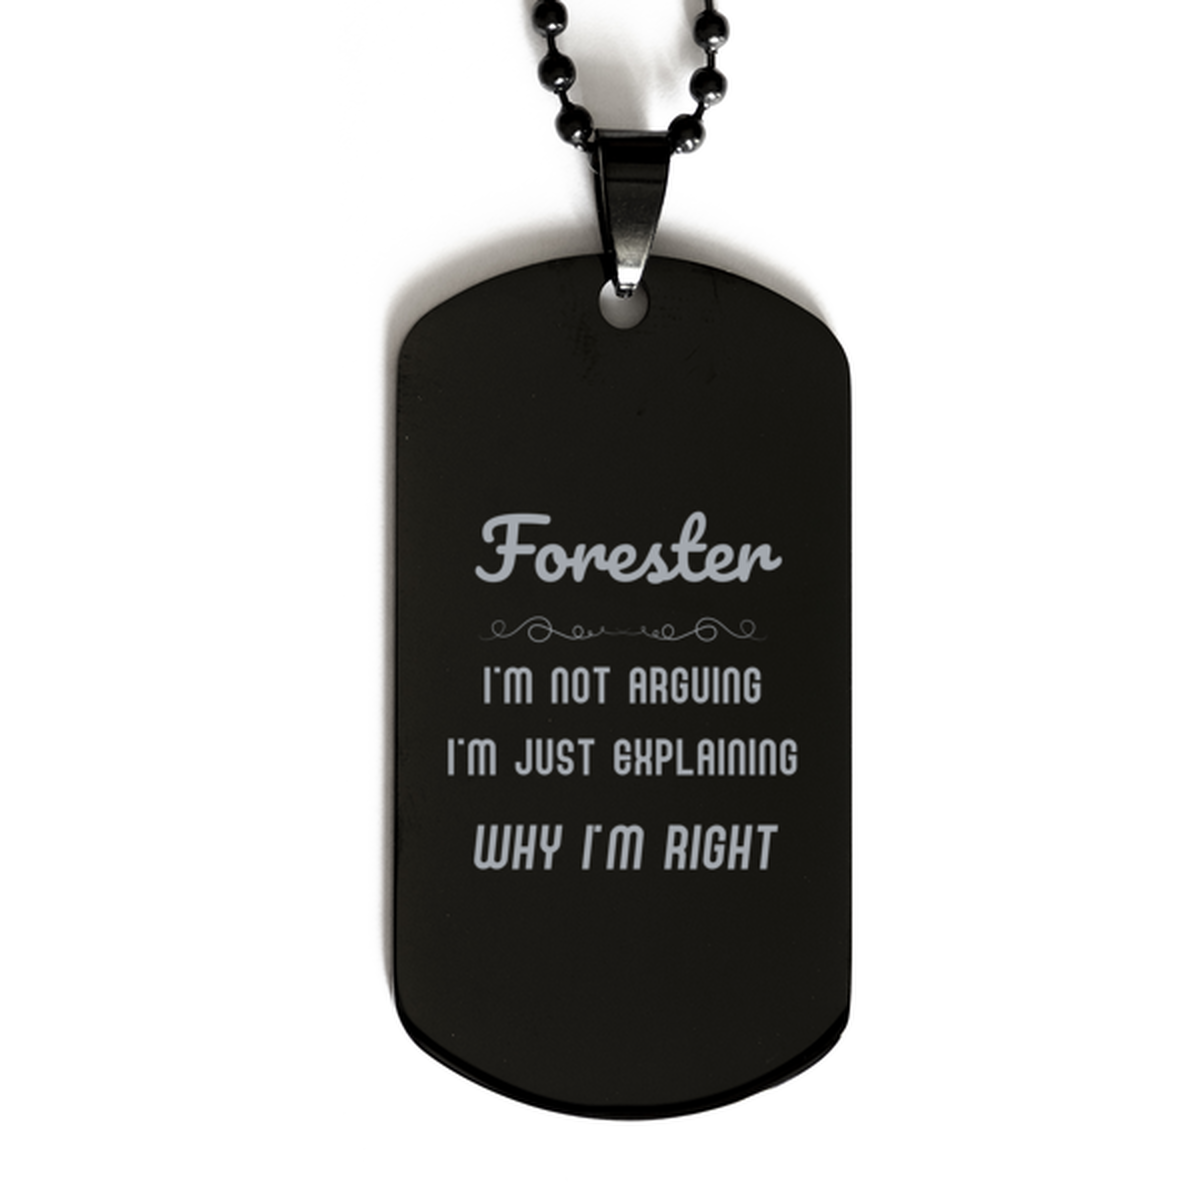 Forester I'm not Arguing. I'm Just Explaining Why I'm RIGHT Black Dog Tag, Funny Saying Quote Forester Gifts For Forester Graduation Birthday Christmas Gifts for Men Women Coworker